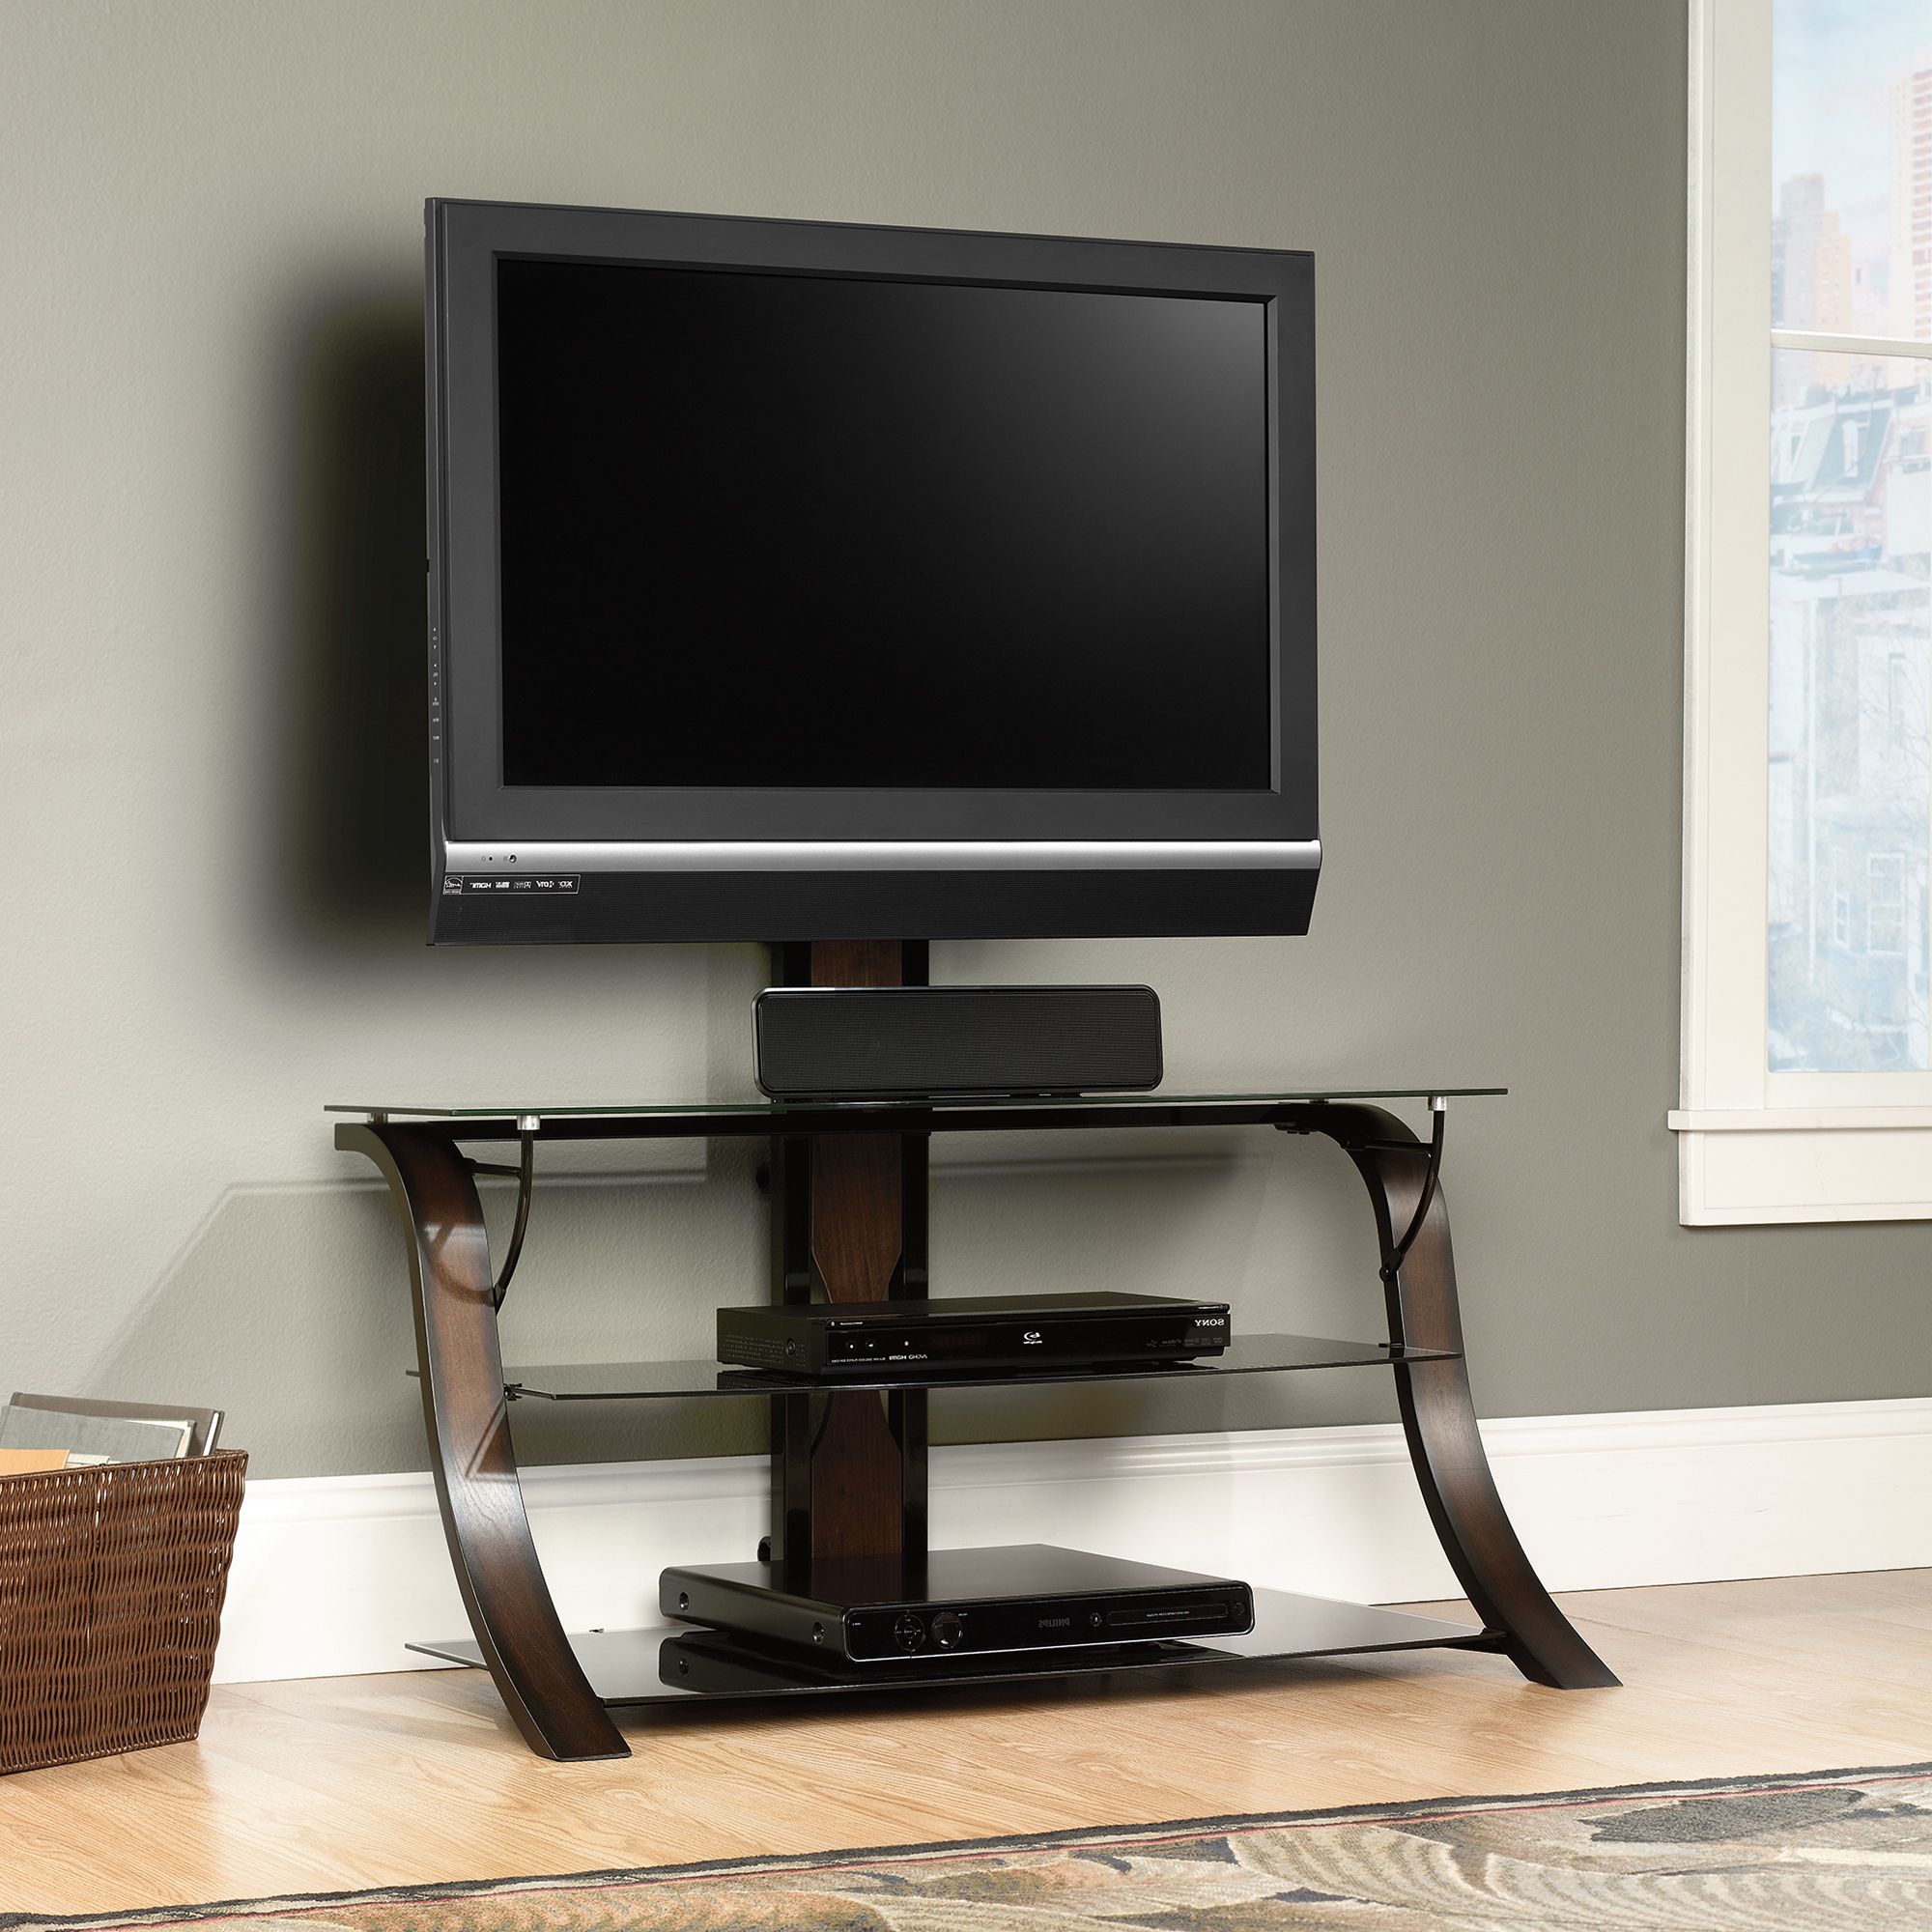 Wall Mounted Tv Stands For Flat Screens For Preferred Flat Panel Tv Stand With Mount Wall Cabinets Portable Stands For (View 16 of 20)